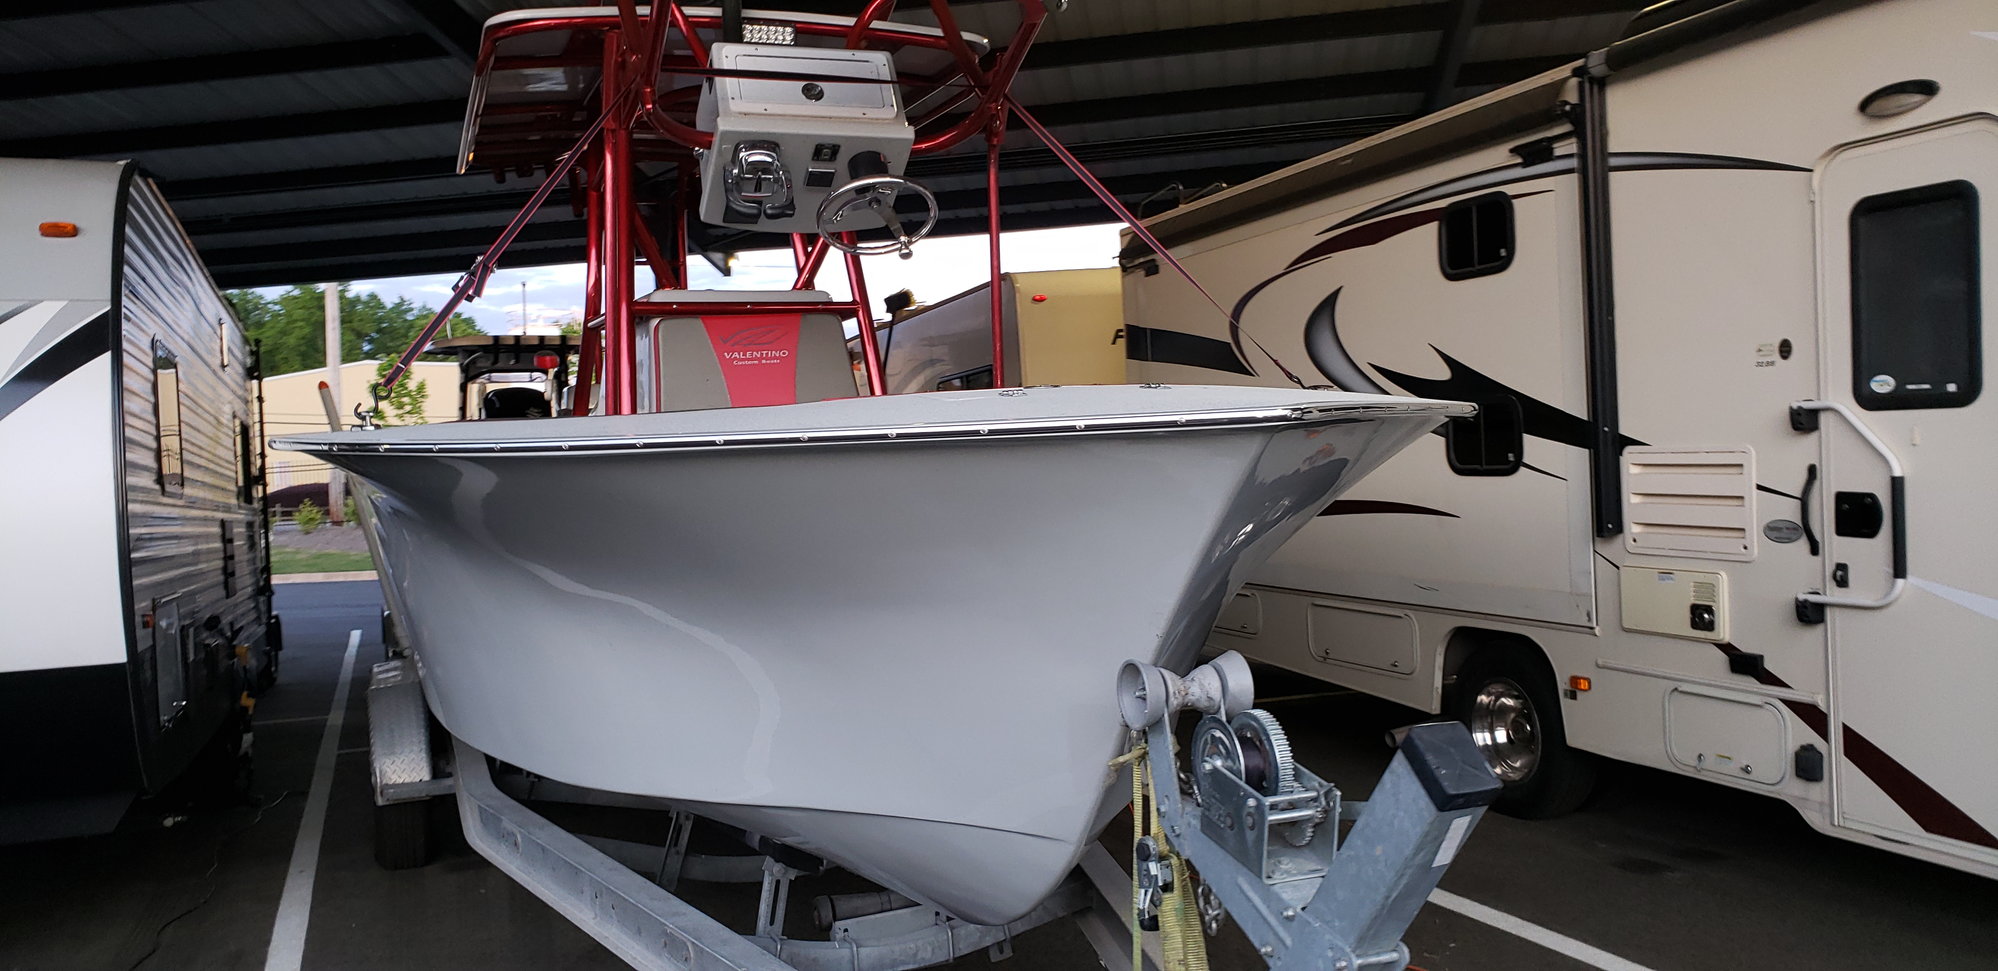 Valentino boats - The Hull Truth - Boating and Forum